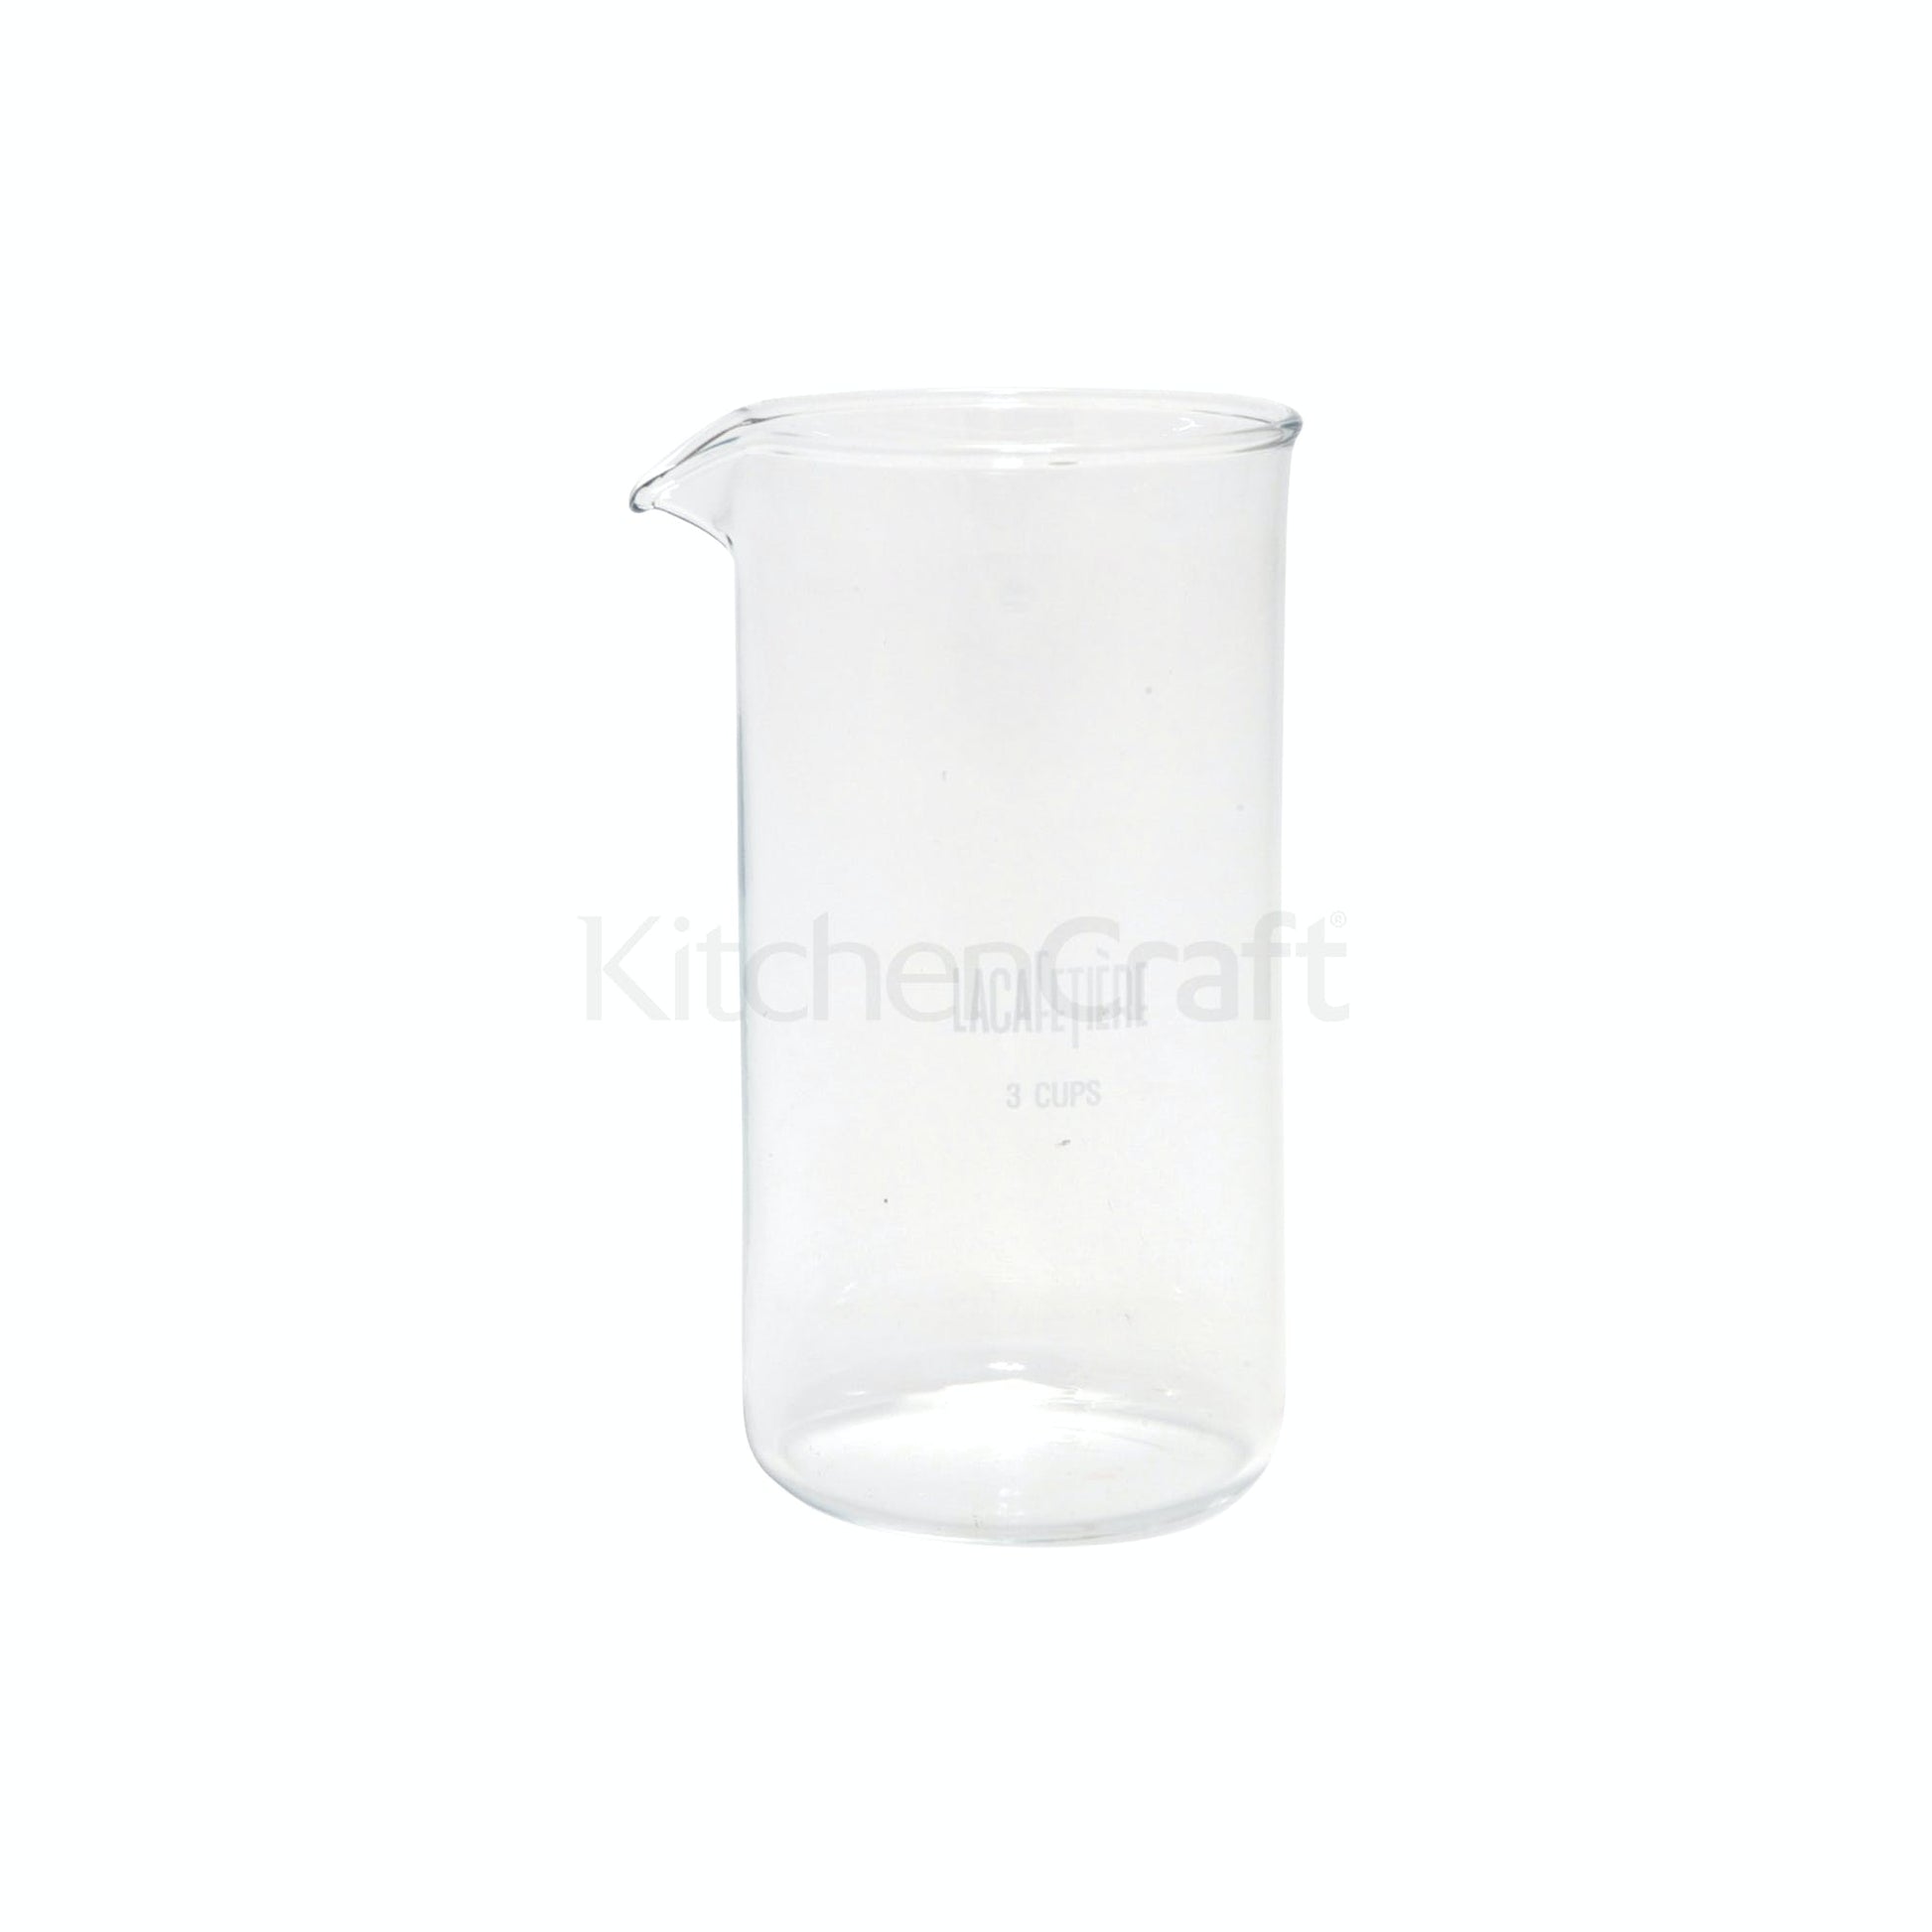 La Cafetiere 3 Cup Cafetiere Replacement Glass Beaker